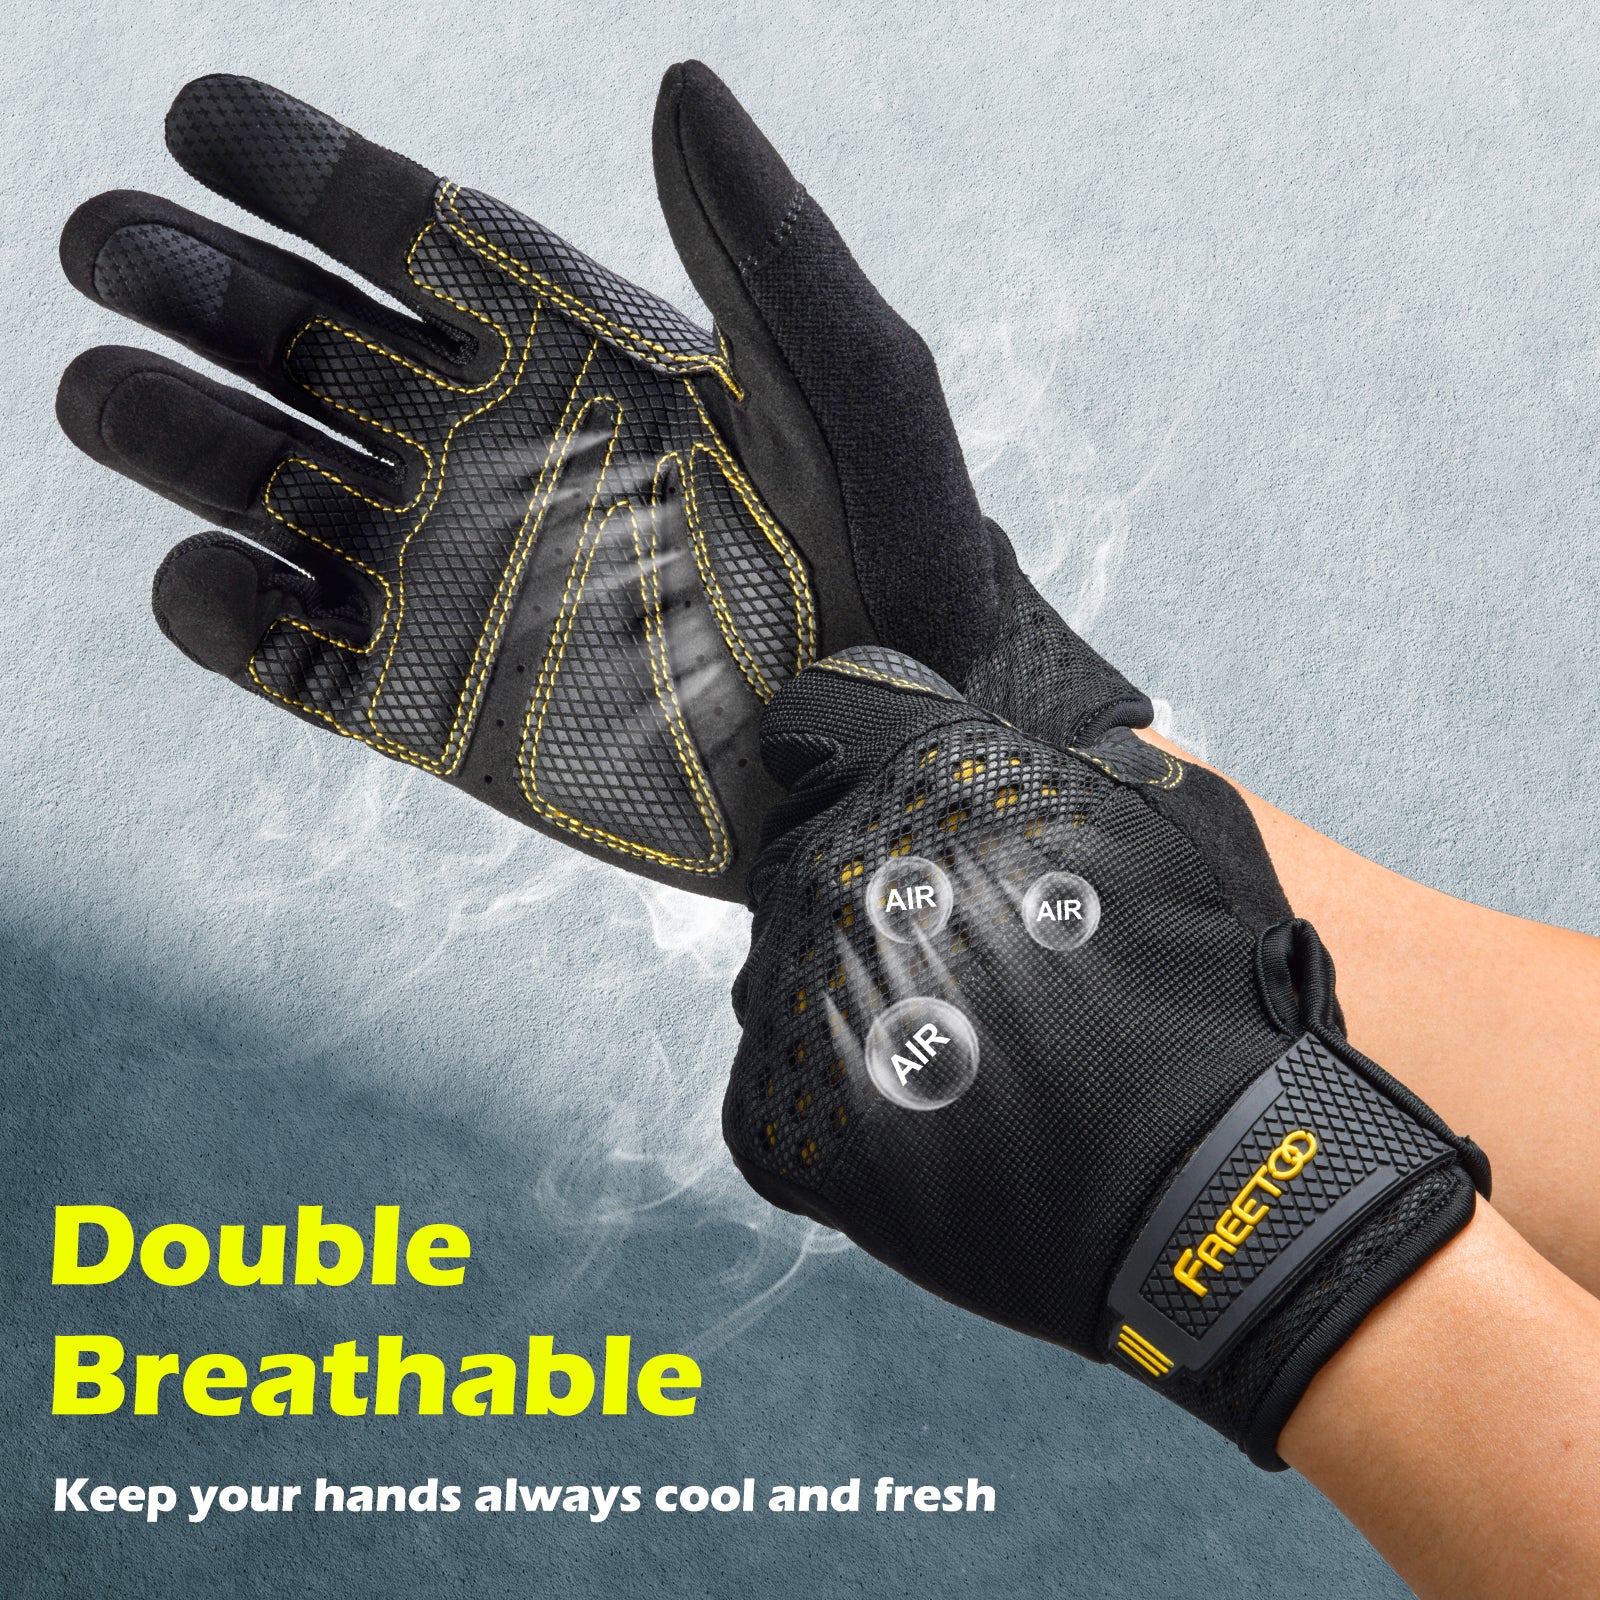 FREETOO® Breathable Safety Utility Mechanic Working Gloves for Men&Women